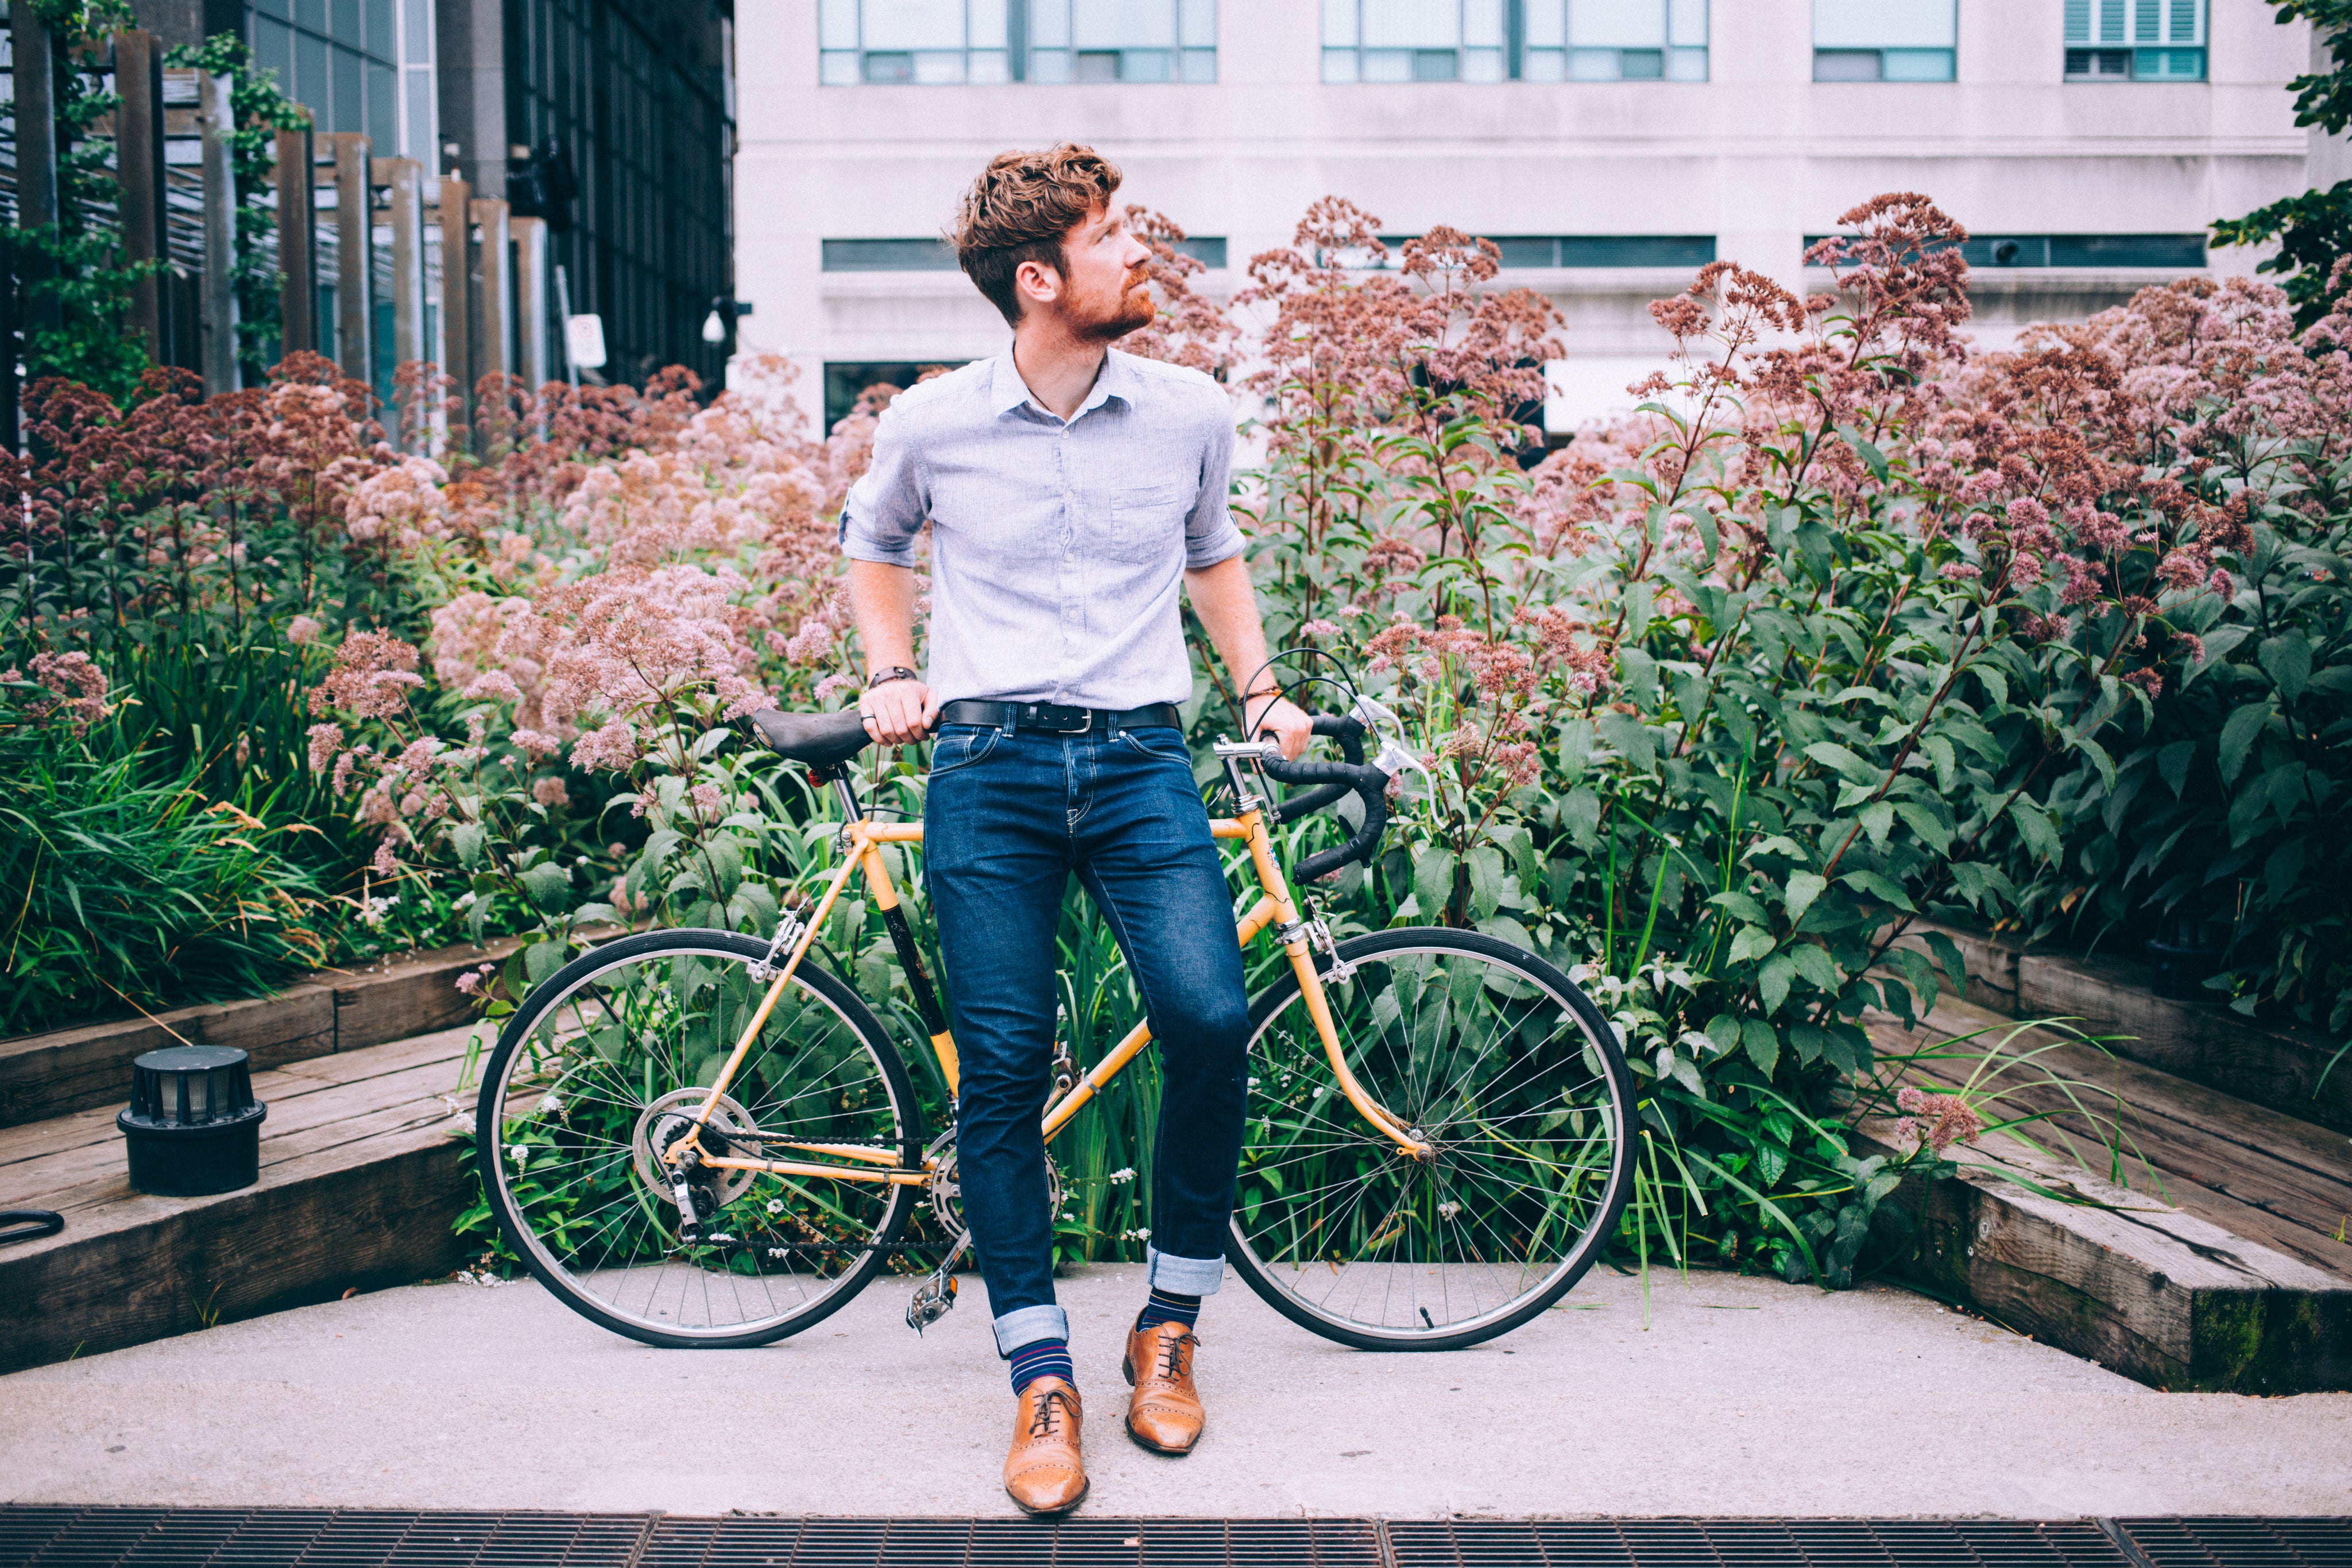 mens-fashion-man-in-shirt-and-jeans-leaning-on-bicycle.jpg